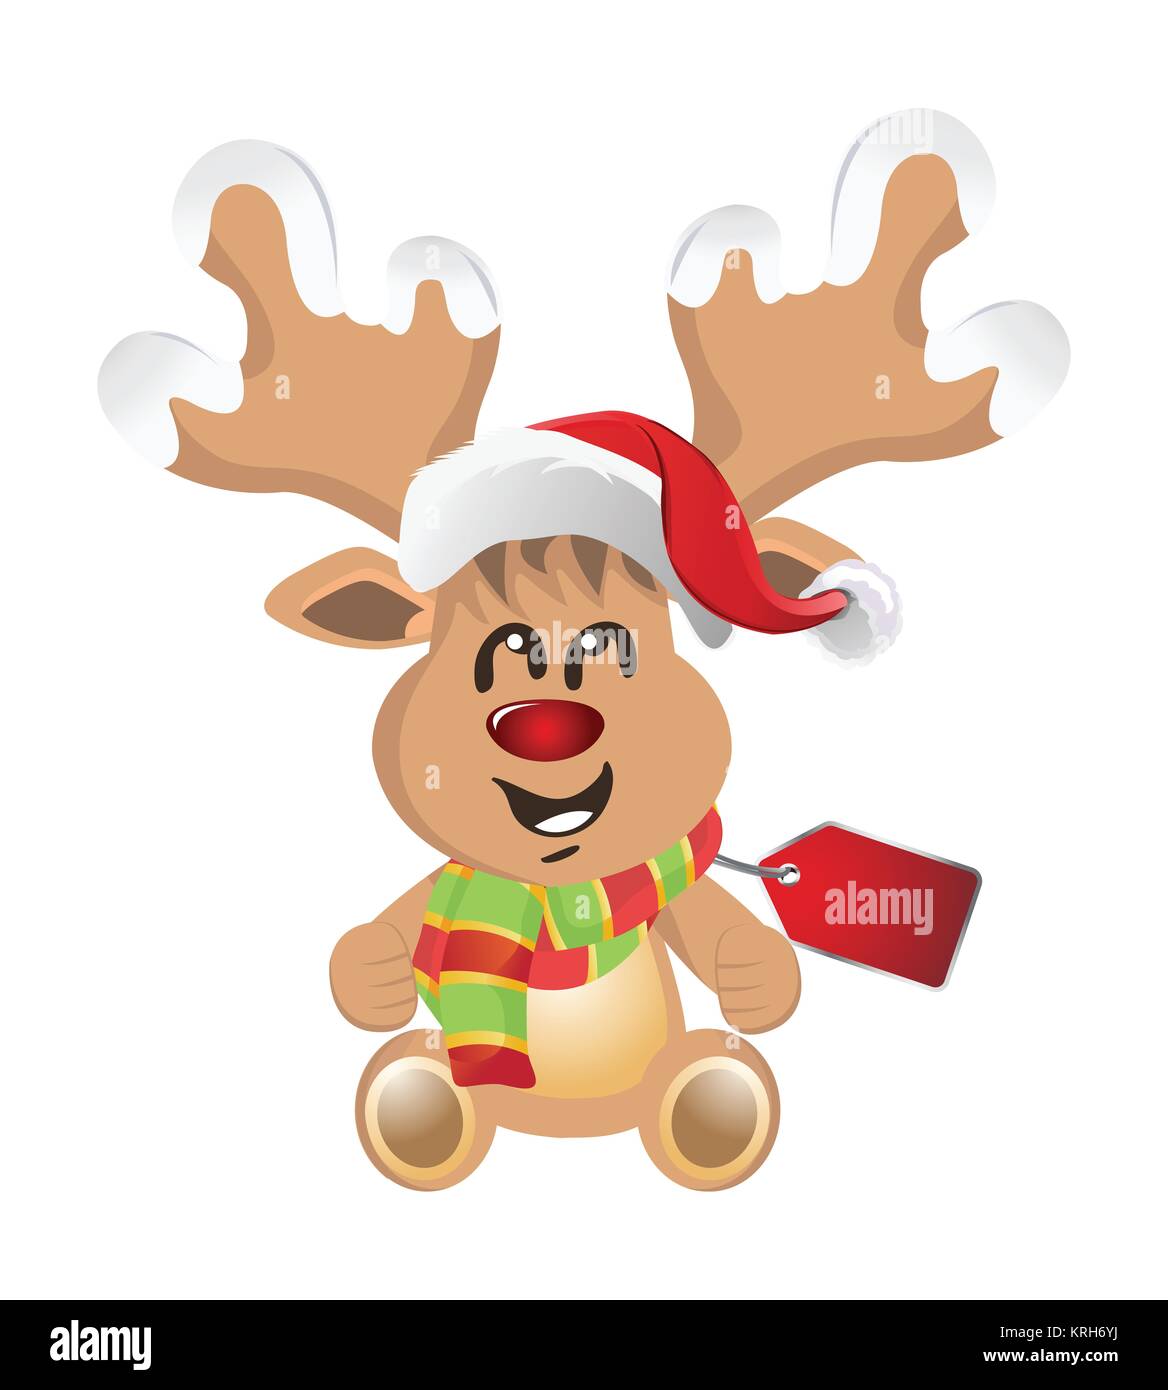 Cartoon reindeer with face emotions Stock Image